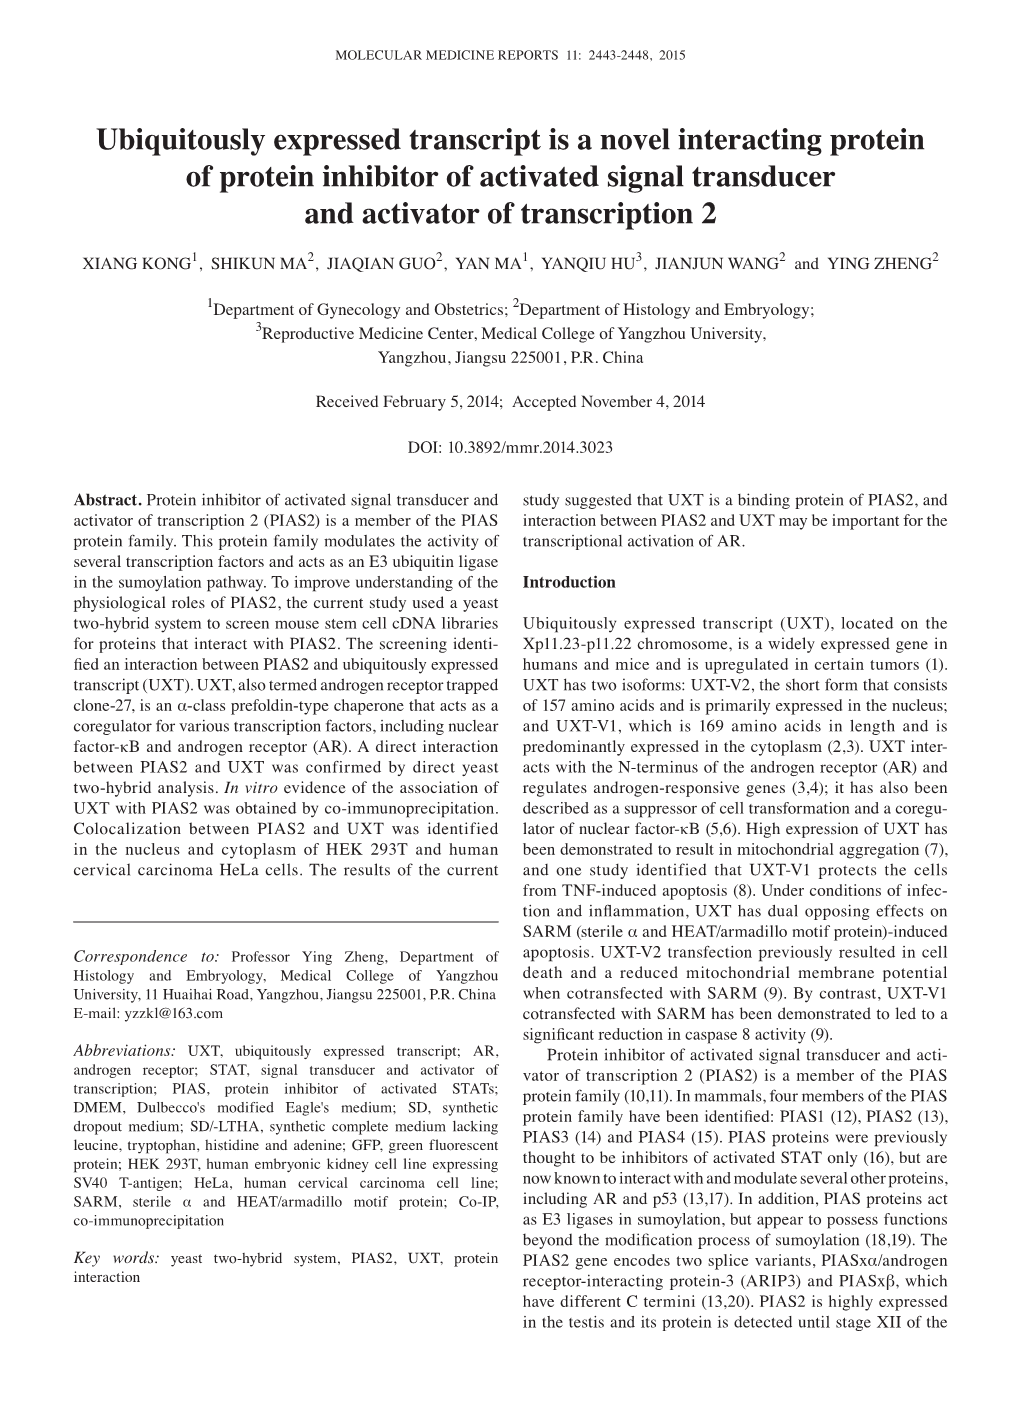 Ubiquitously Expressed Transcript Is a Novel Interacting Protein of Protein Inhibitor of Activated Signal Transducer and Activator of Transcription 2